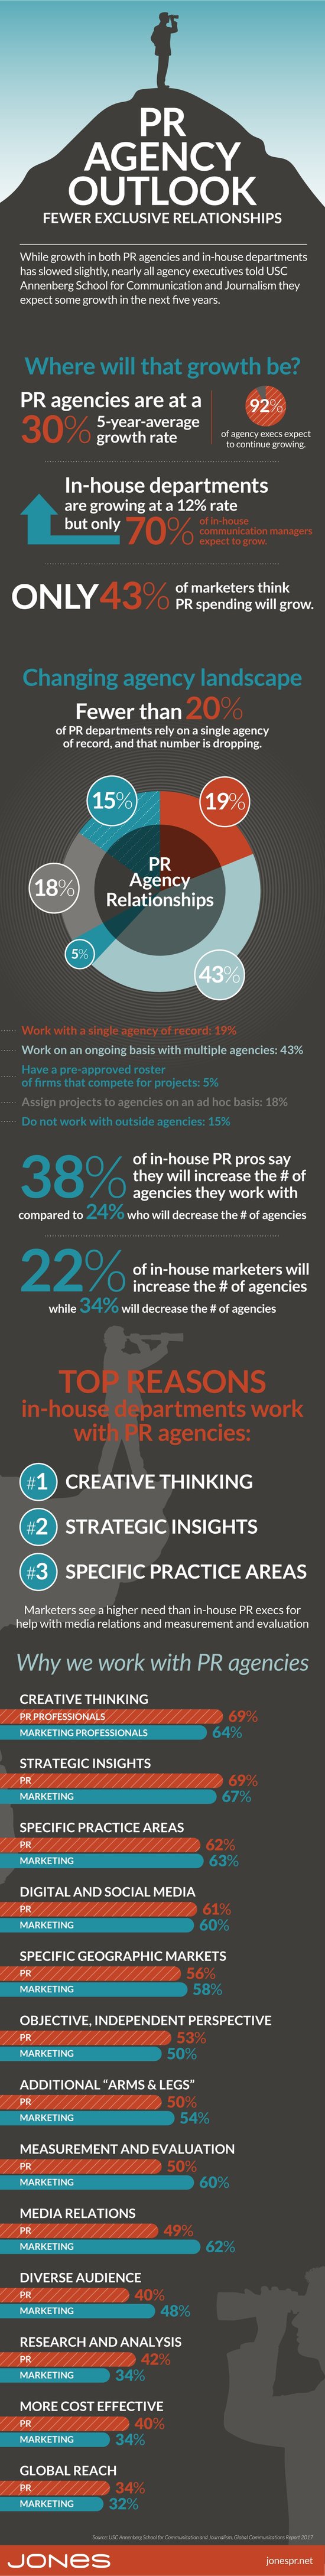 PR Agency Outlook: Fewer Exclusive Relationships (infographic)